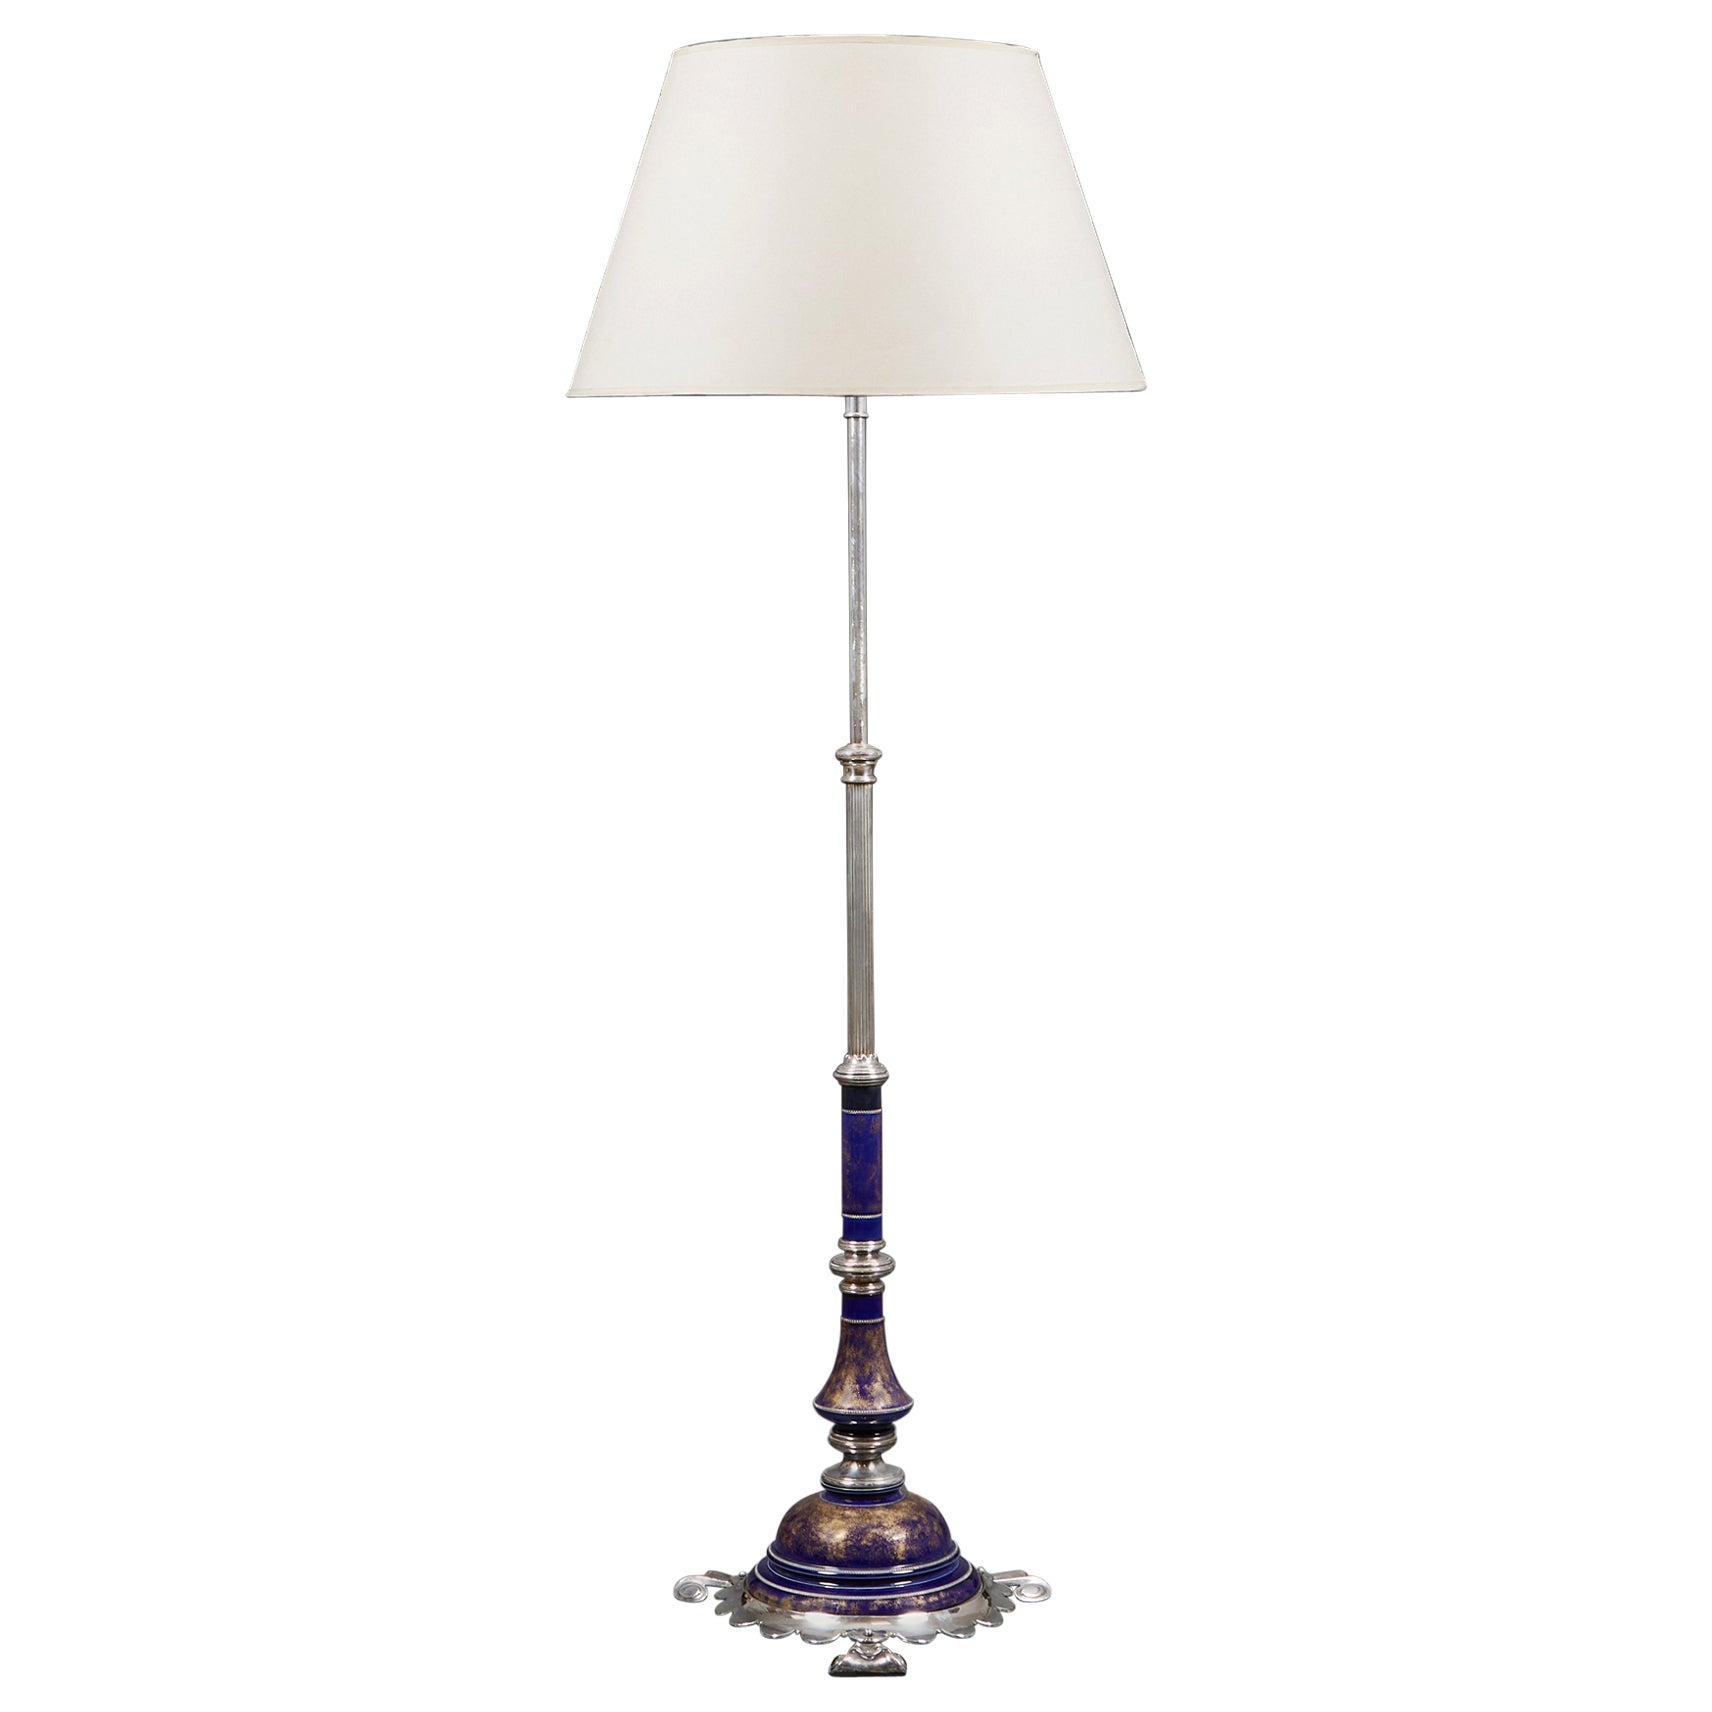 A Silver Plate And Blue Enamel Floor Lamp For Sale